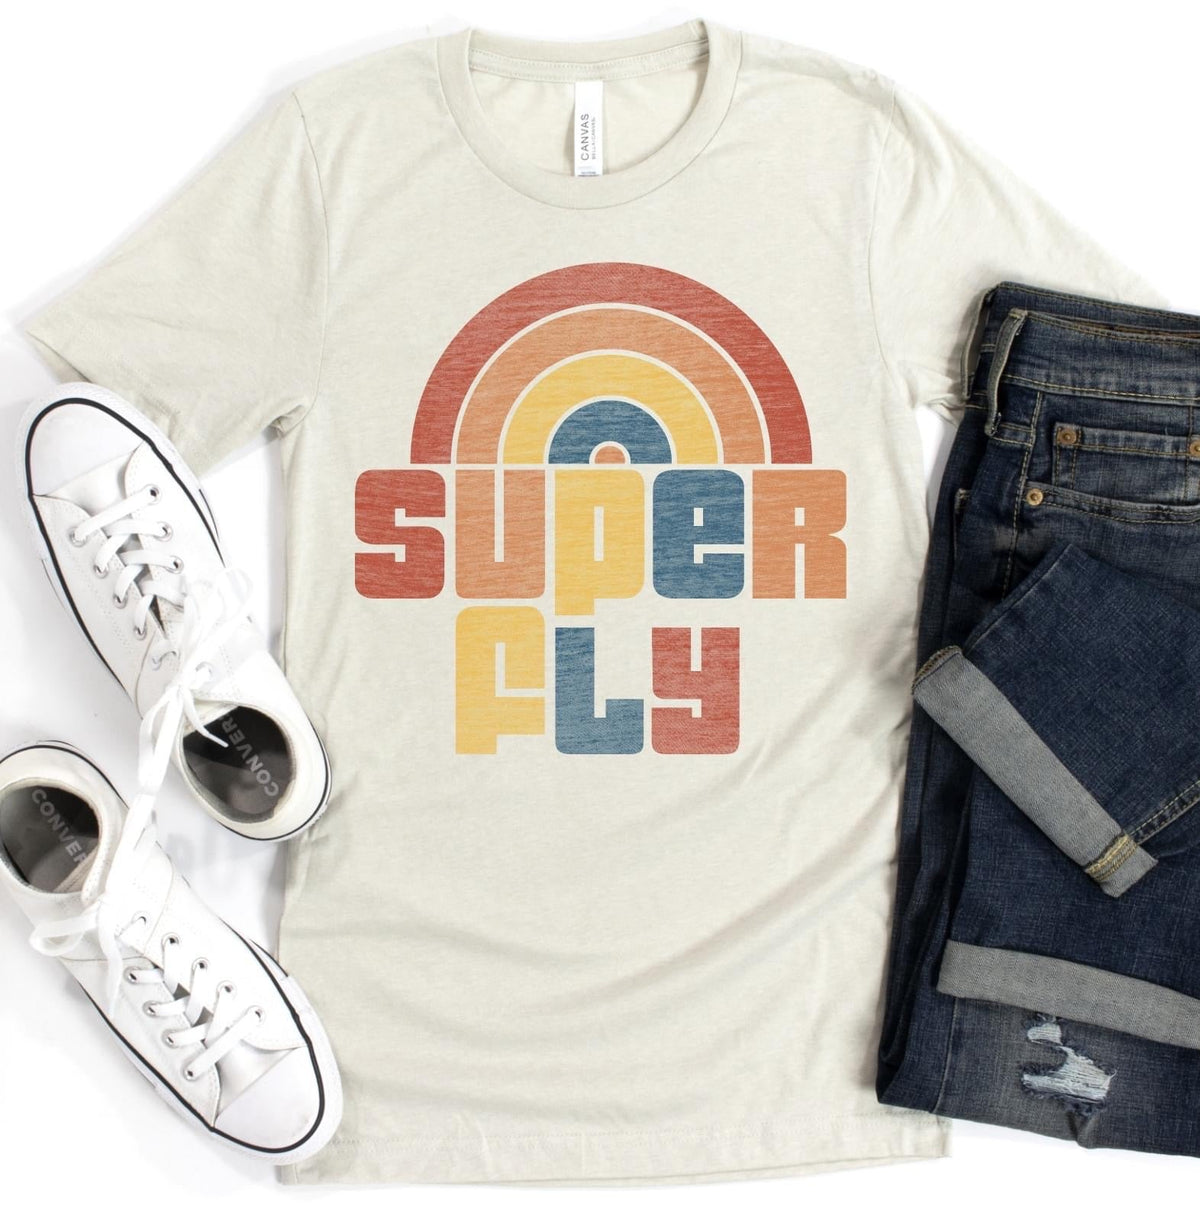 Super Fly Graphic Tee